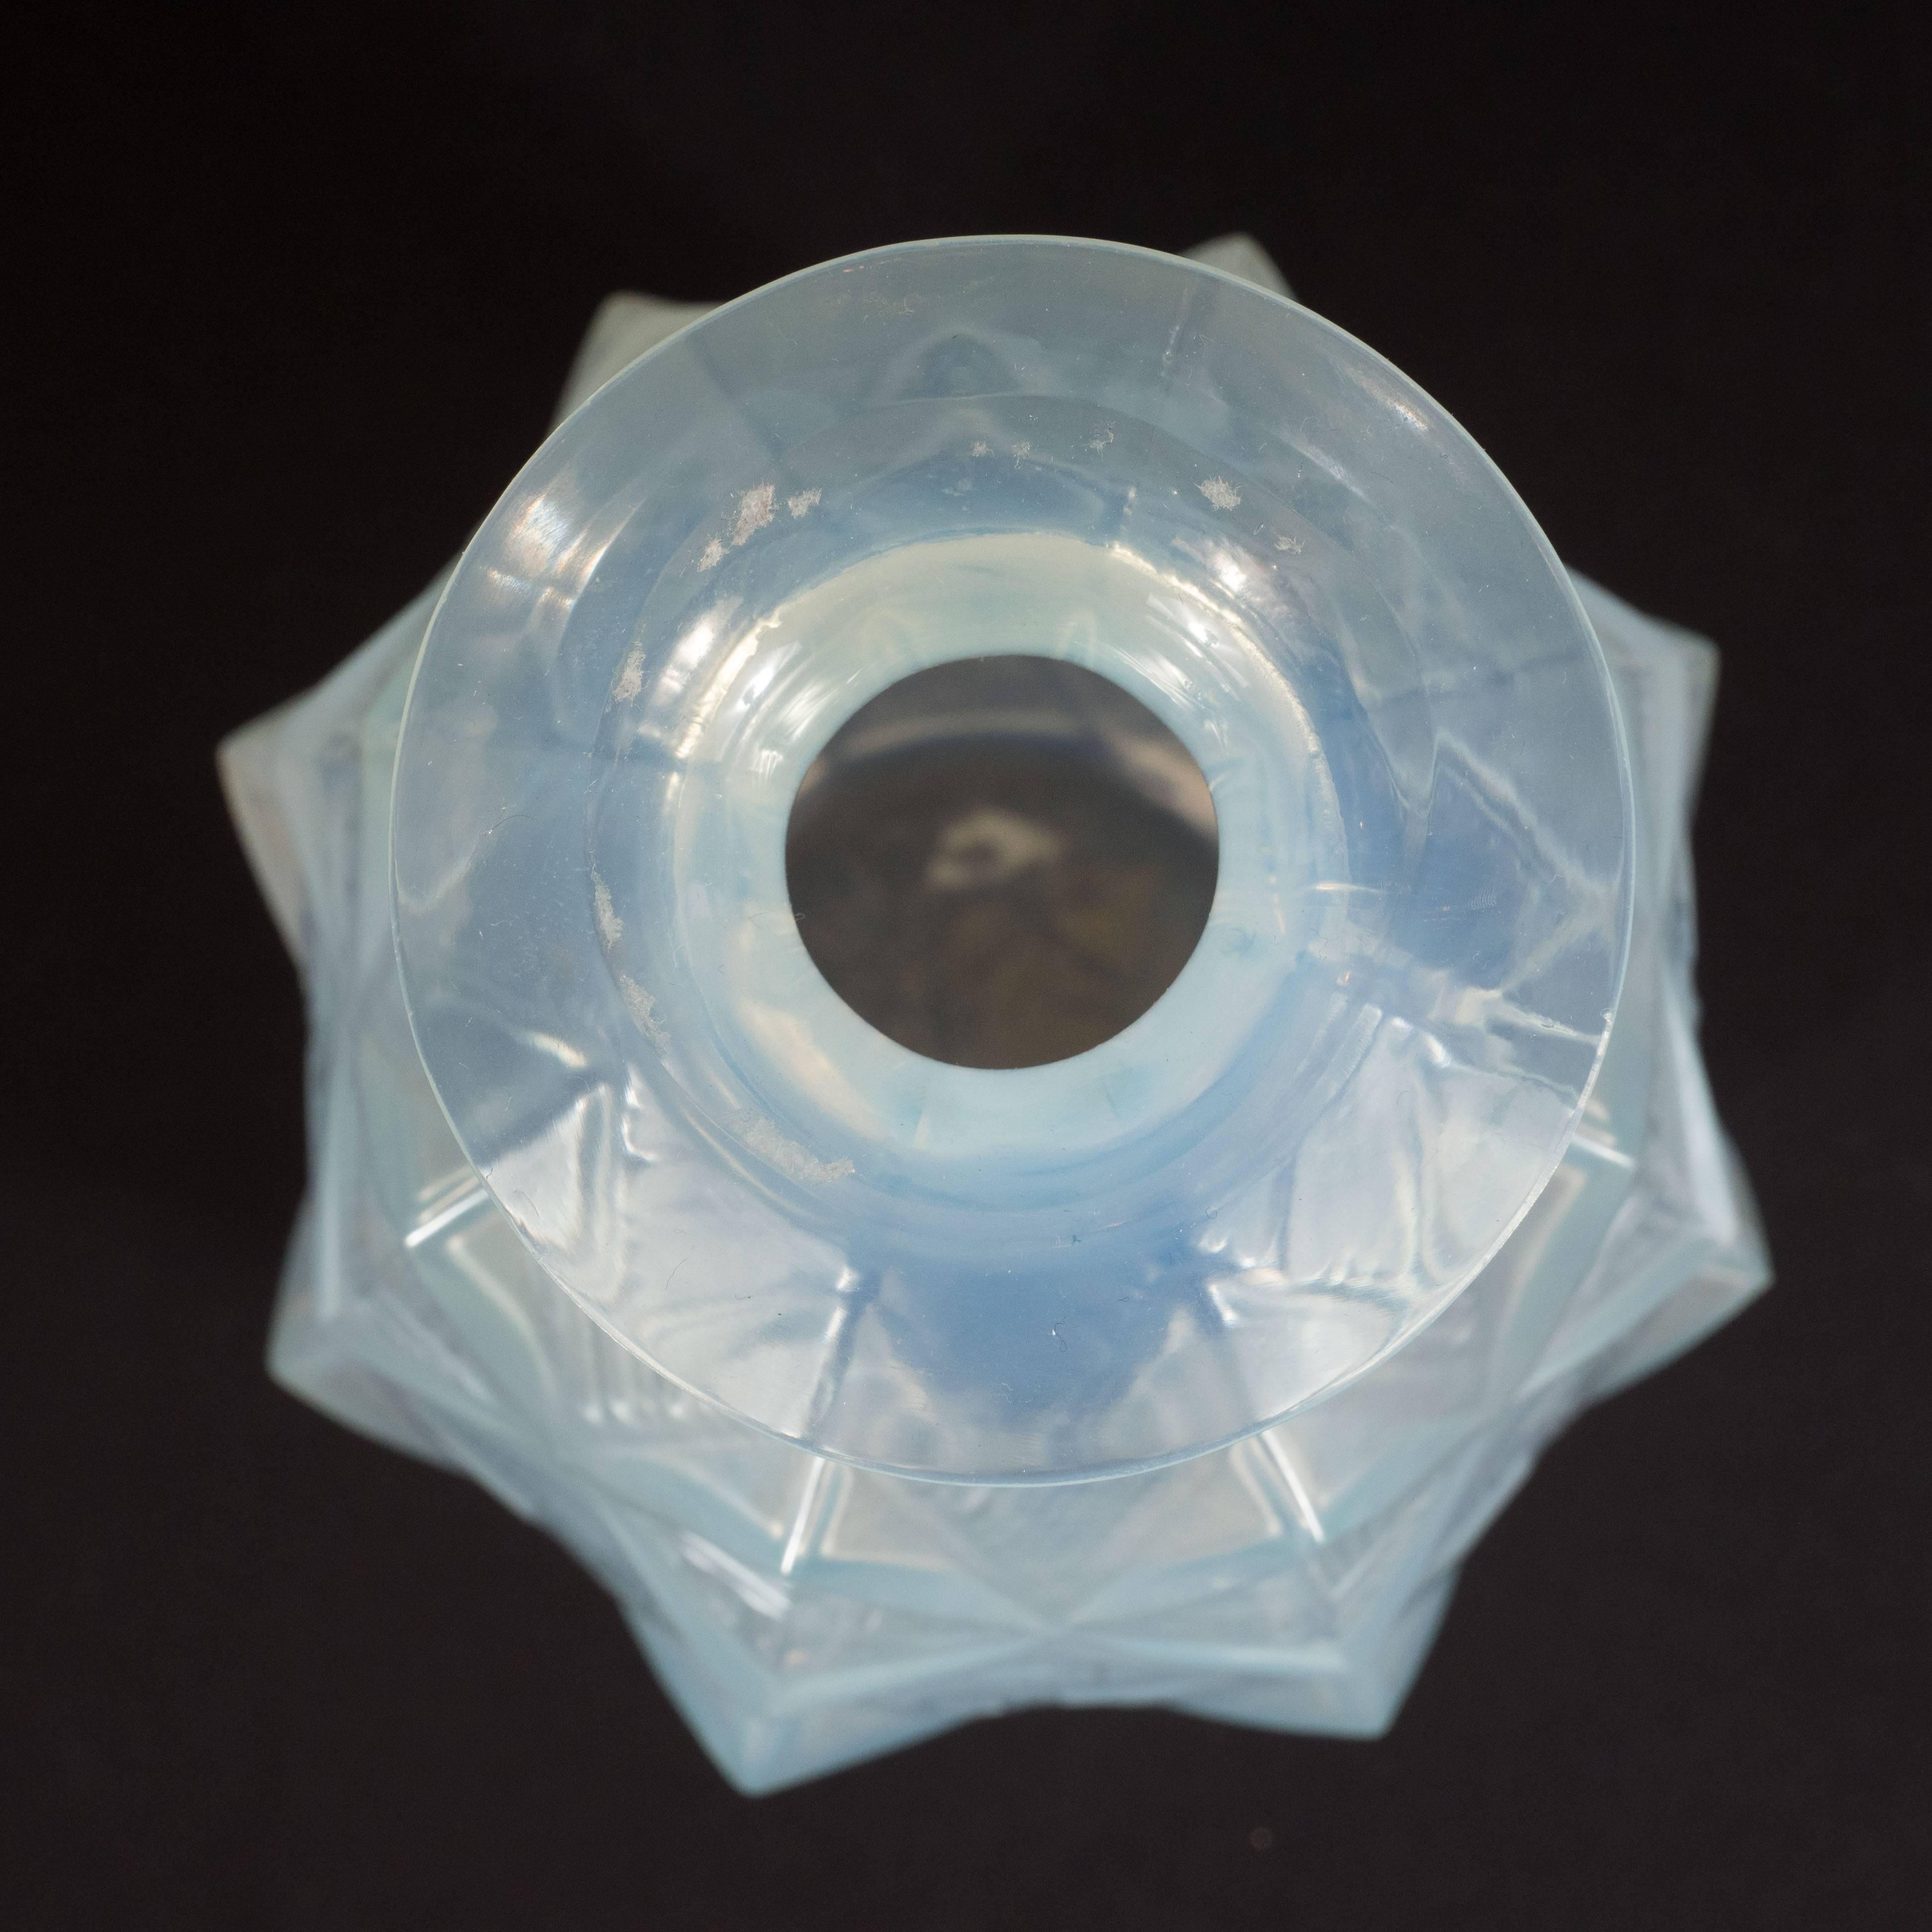 Art Glass French Art Deco Opalescent Glass Vase with Raised Geometric Patterns by Sabino